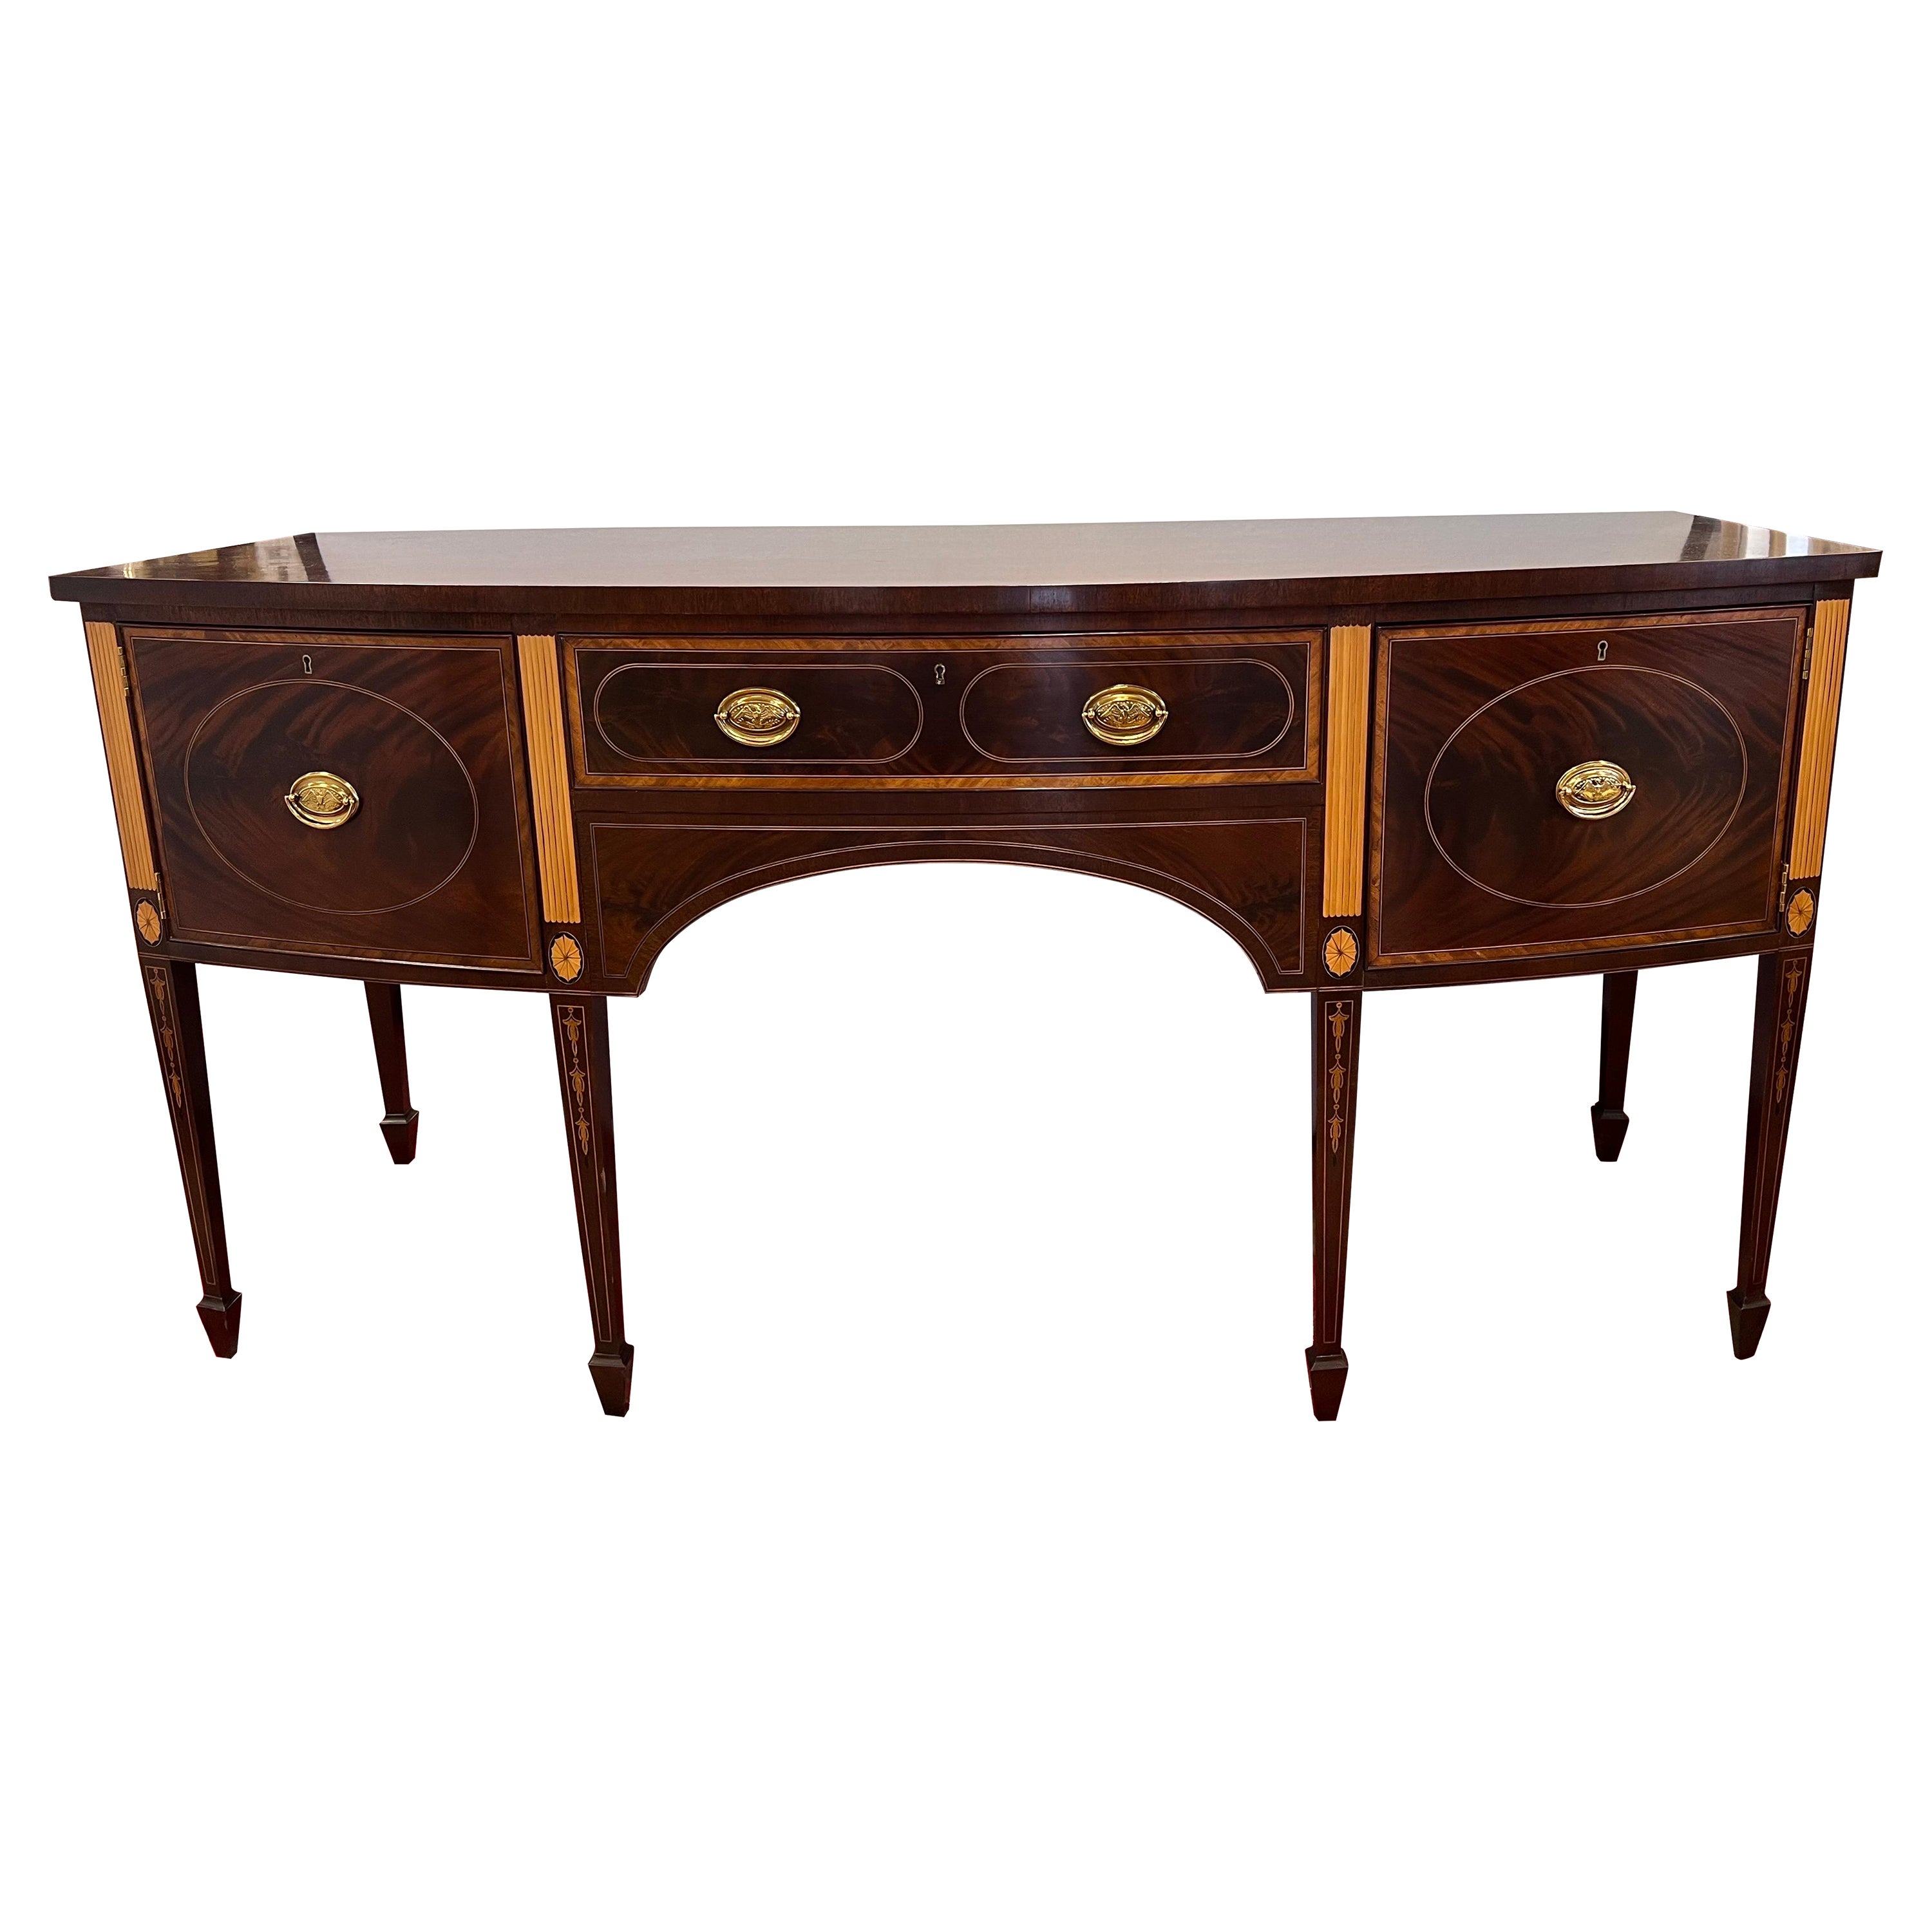 Stickley Furniture Federal Mahogany Inlay Sideboard Credenza Buffet For Sale